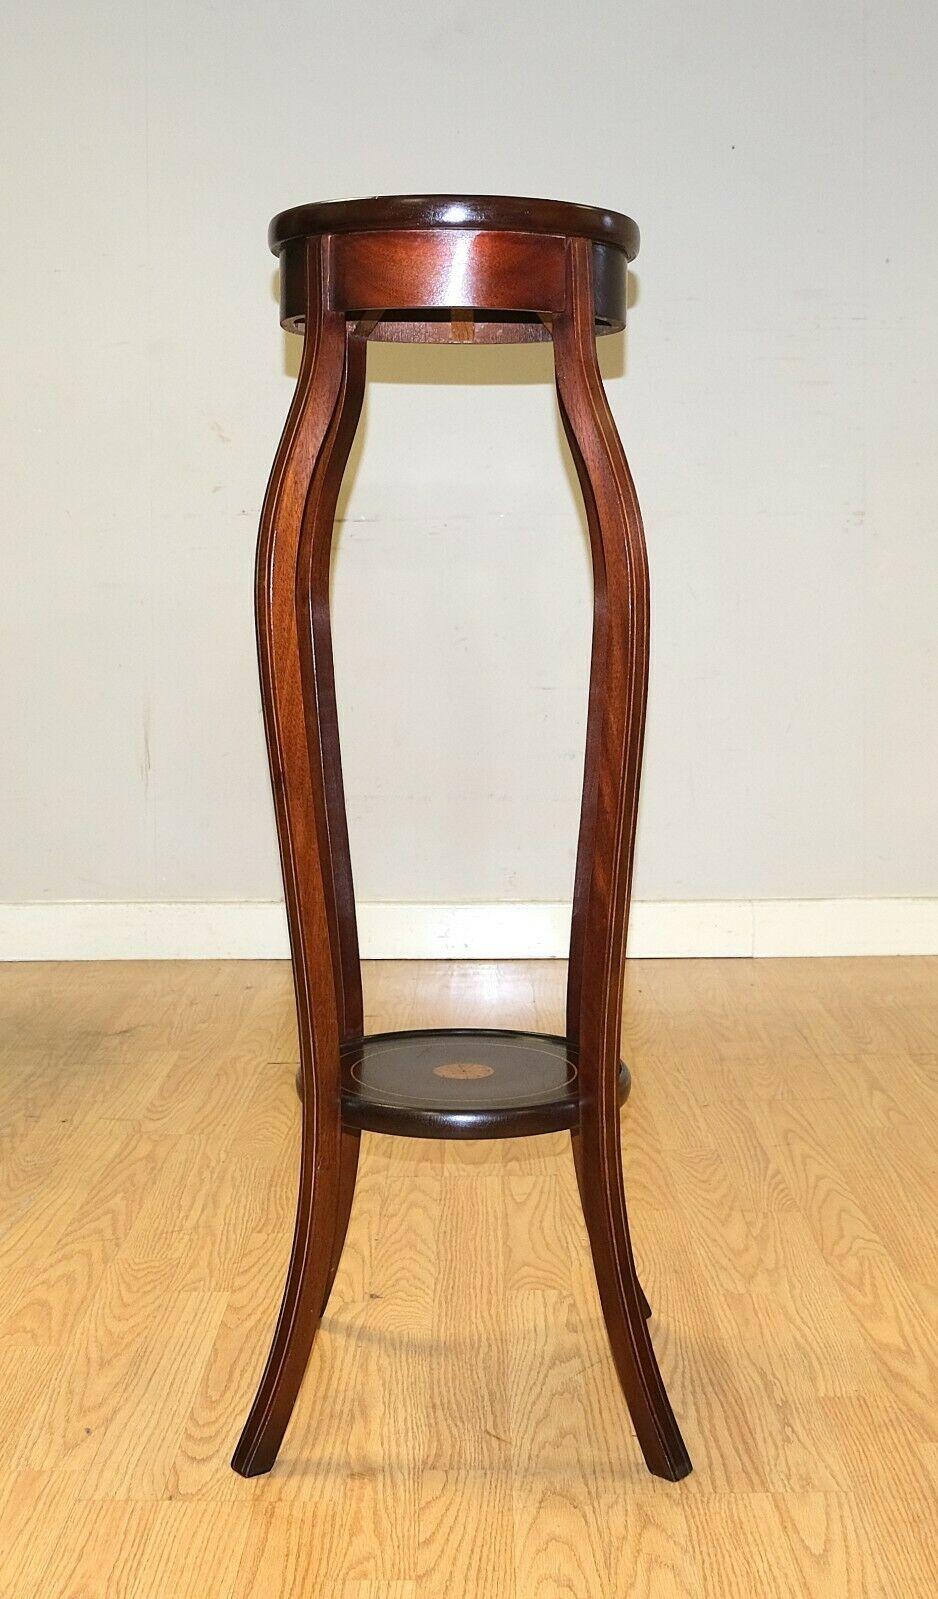 We are delighted to offer for sale this lovely Edwardian Sheraton Revival brown Mahogany plant stand.

This elegant, nice and good looking jardinière stand offers you two tiers, beautifully inlaid with Sheraton details. The item is standing on